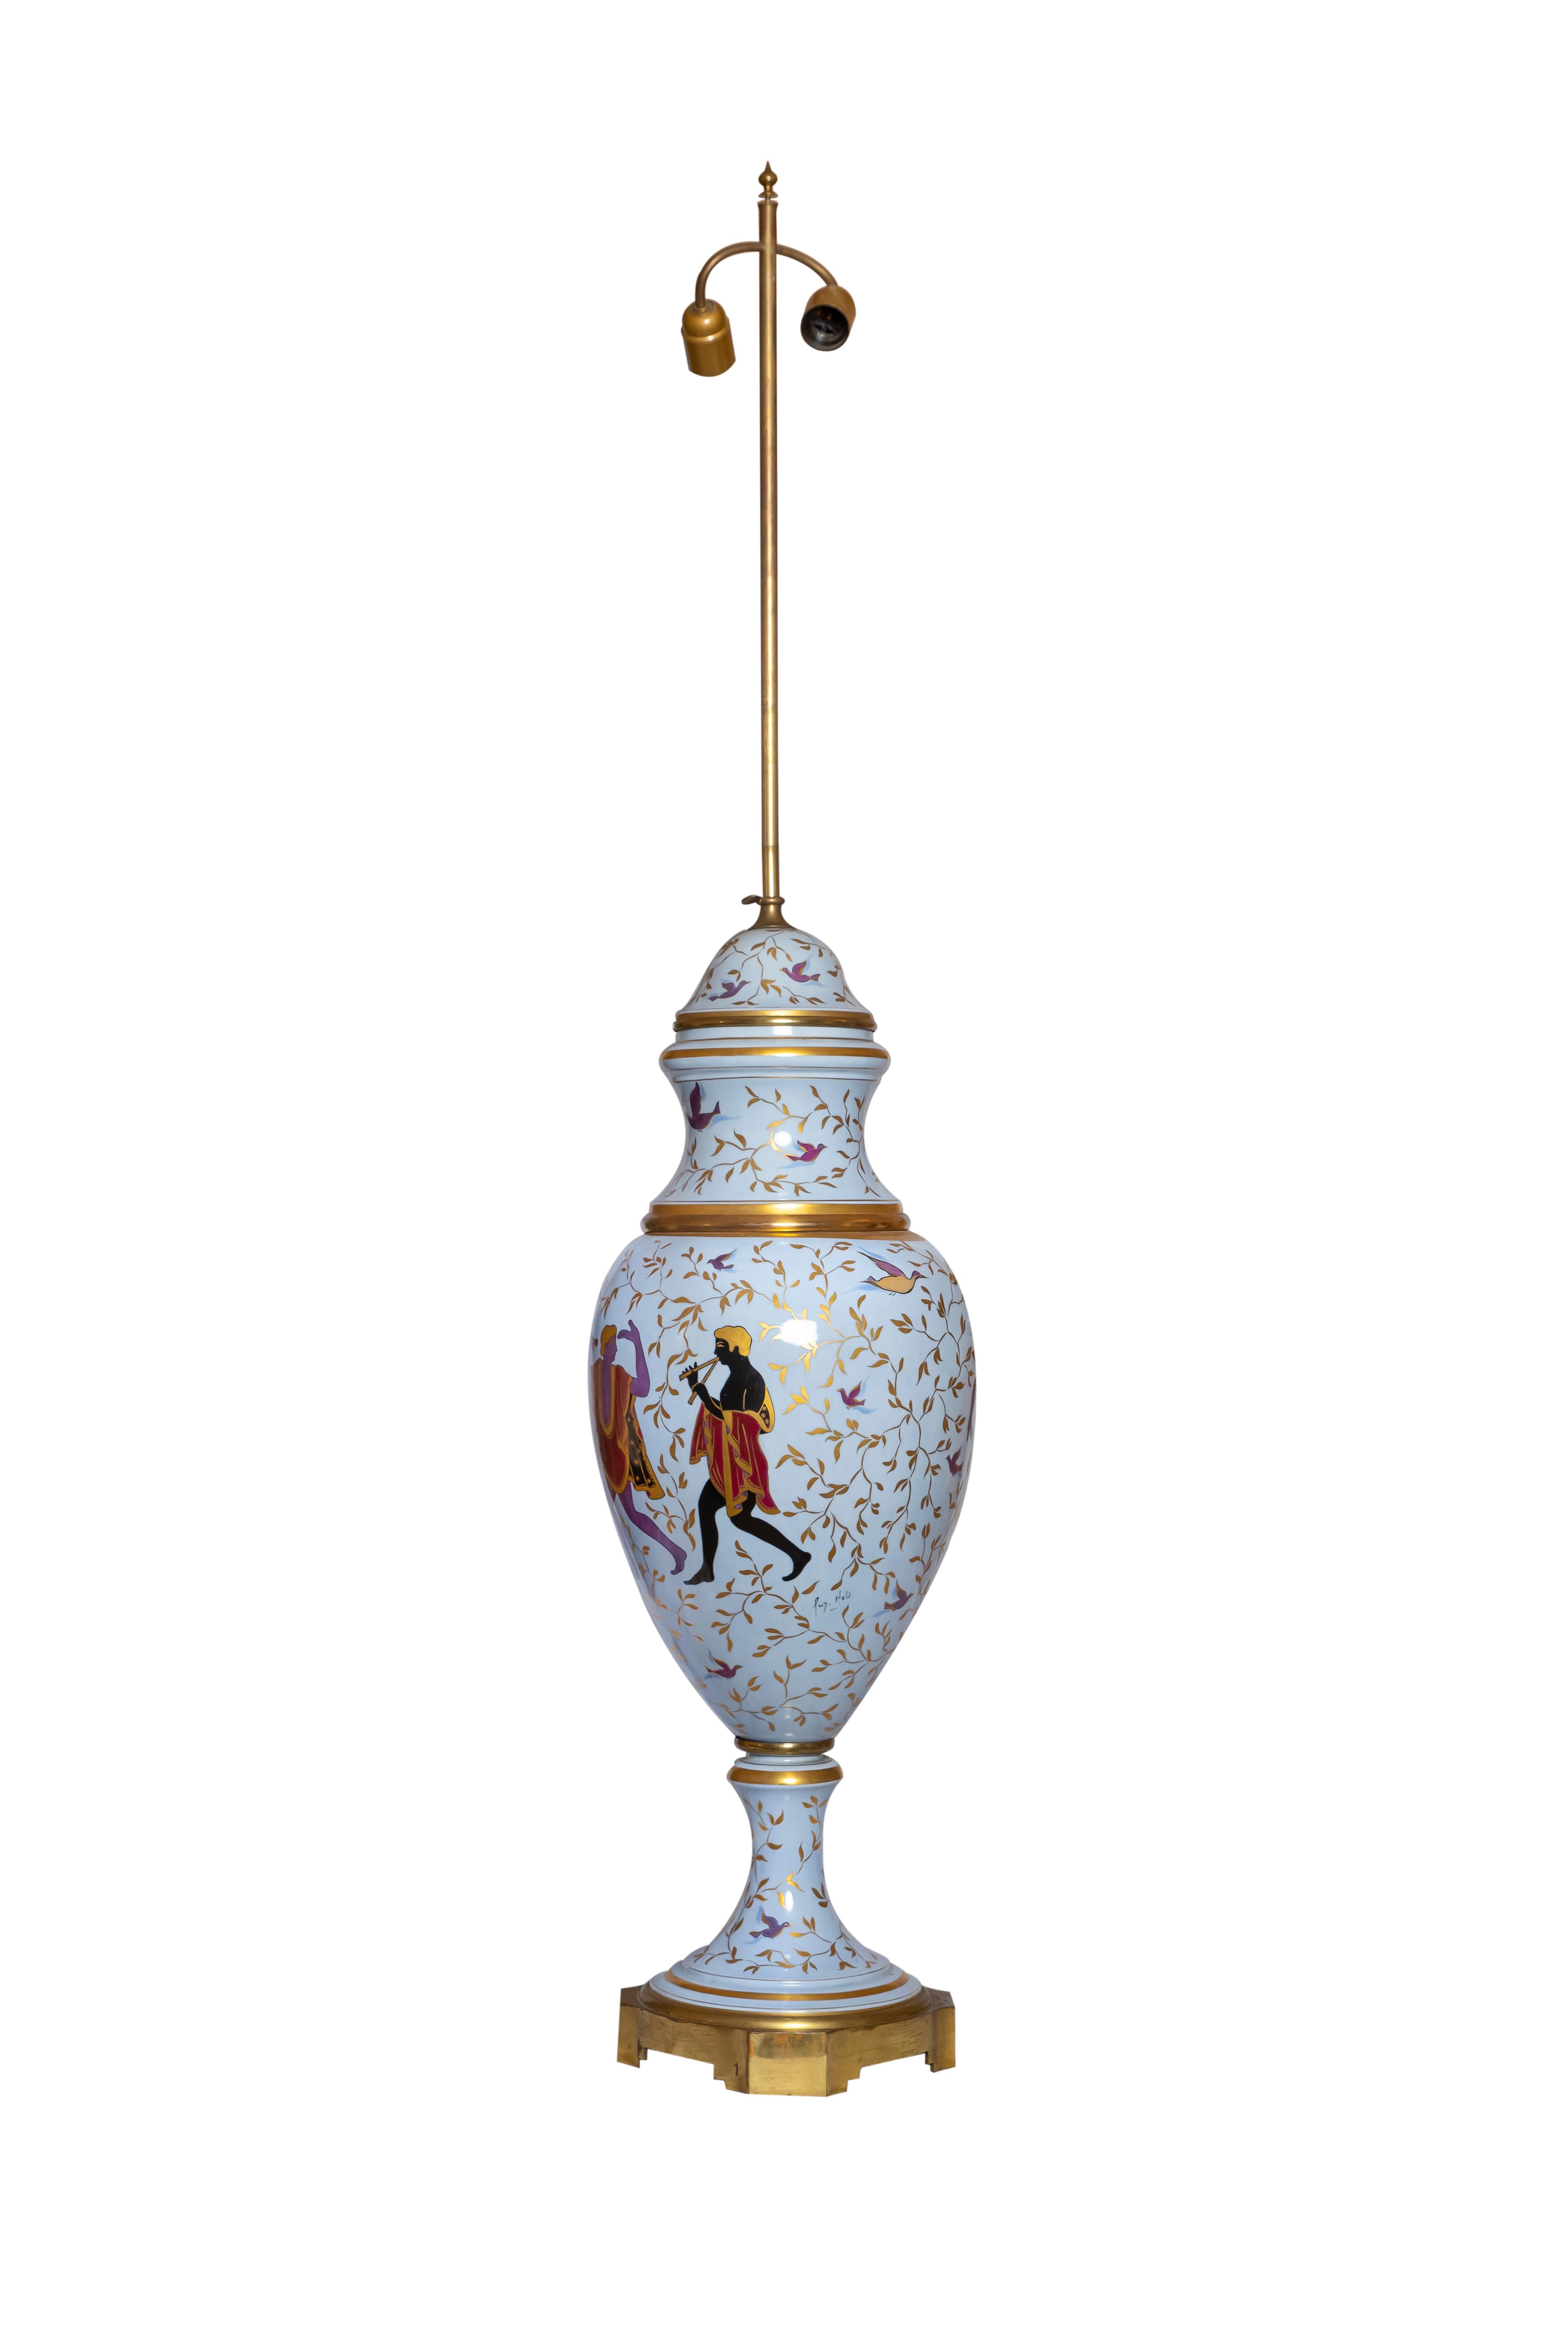 A 20th century french Porcelaine de Sèvres, Hauts-de-Seine, painted vase mounted as a table lamp with gilted details and brass base.
Gilt foliate and purple bird decoration, The body is decorated with dancing figures after the antique on a blue